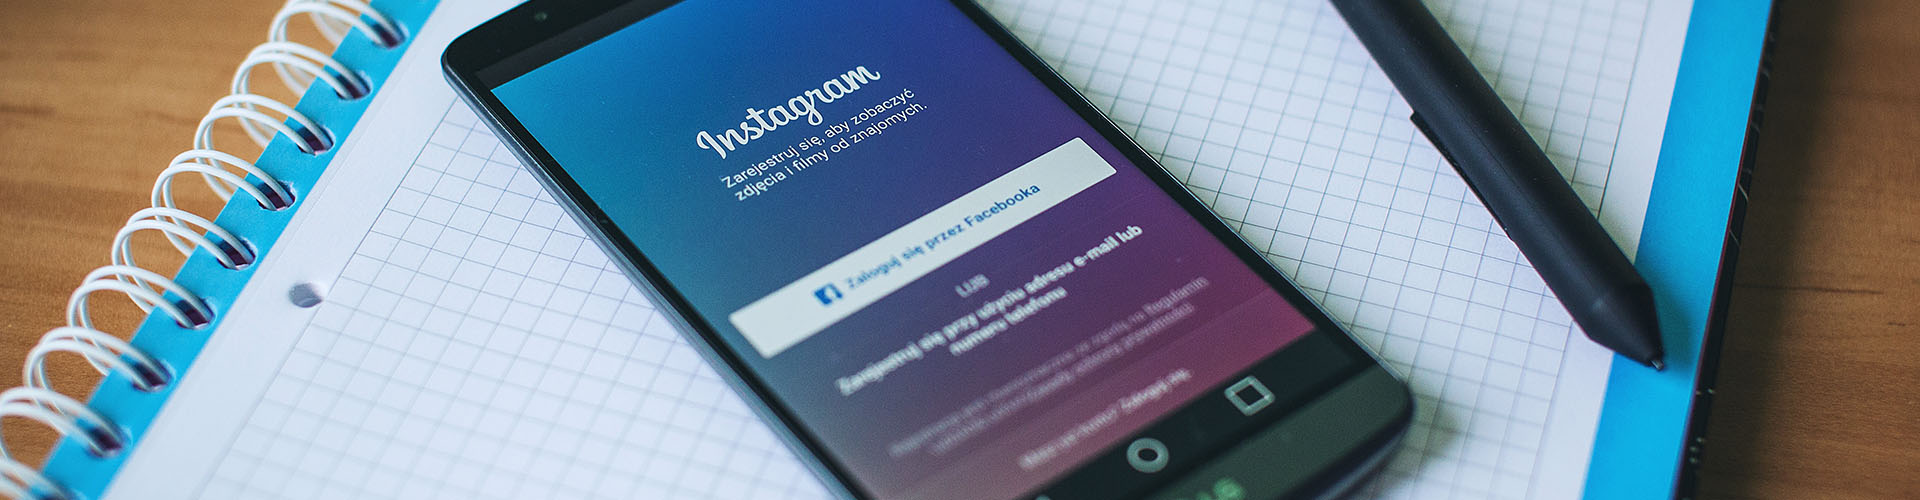 instagram for business new features 1